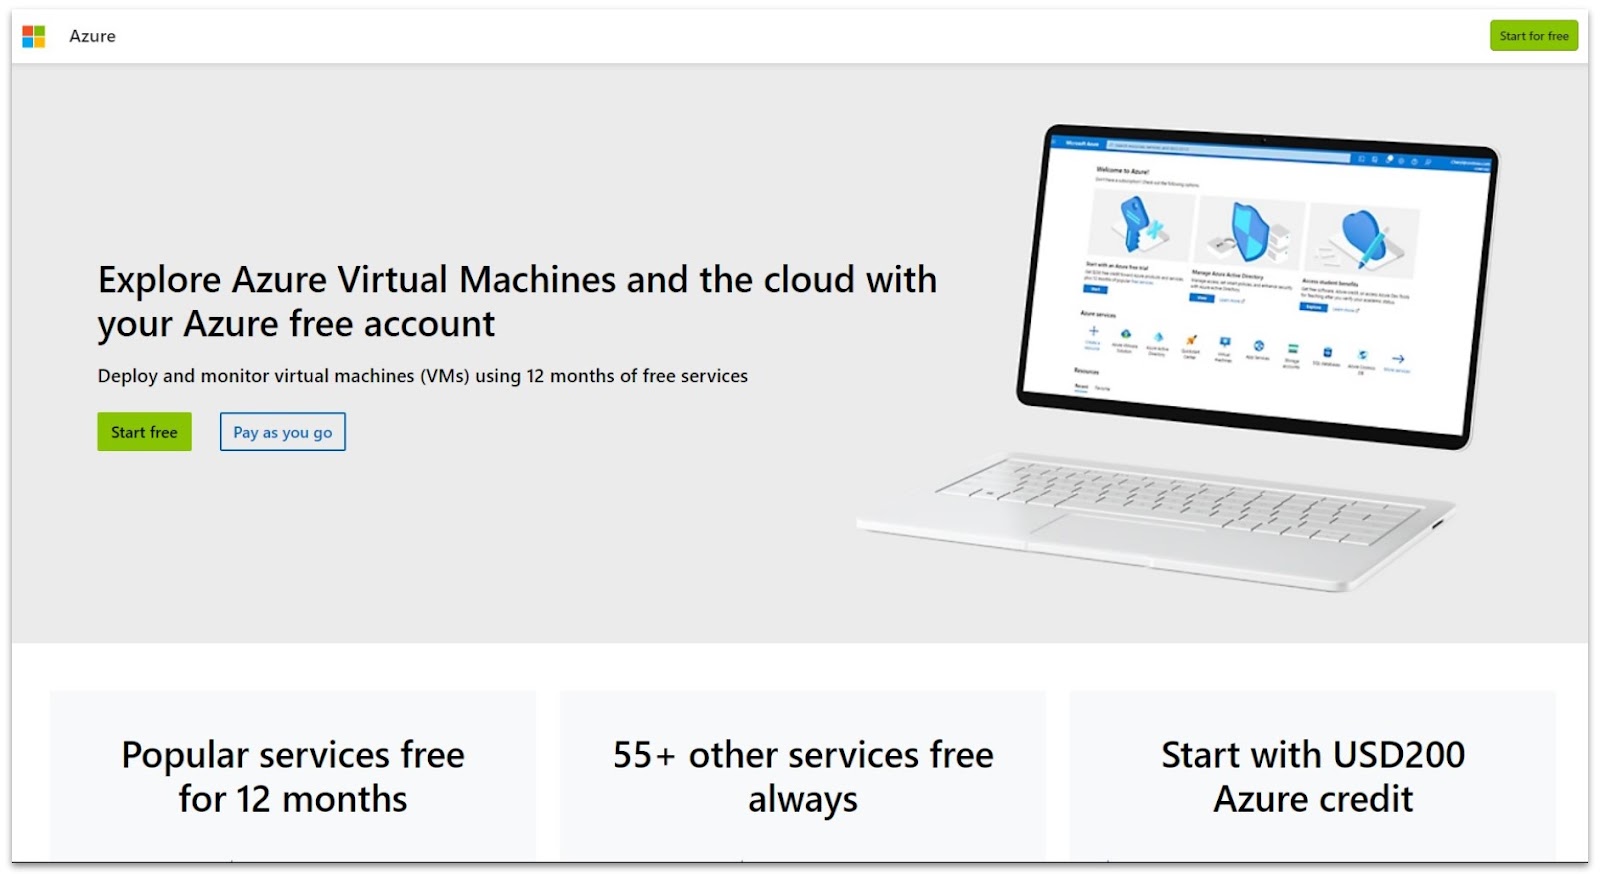 Microsoft Azure free trial and $200 credit offer landing page